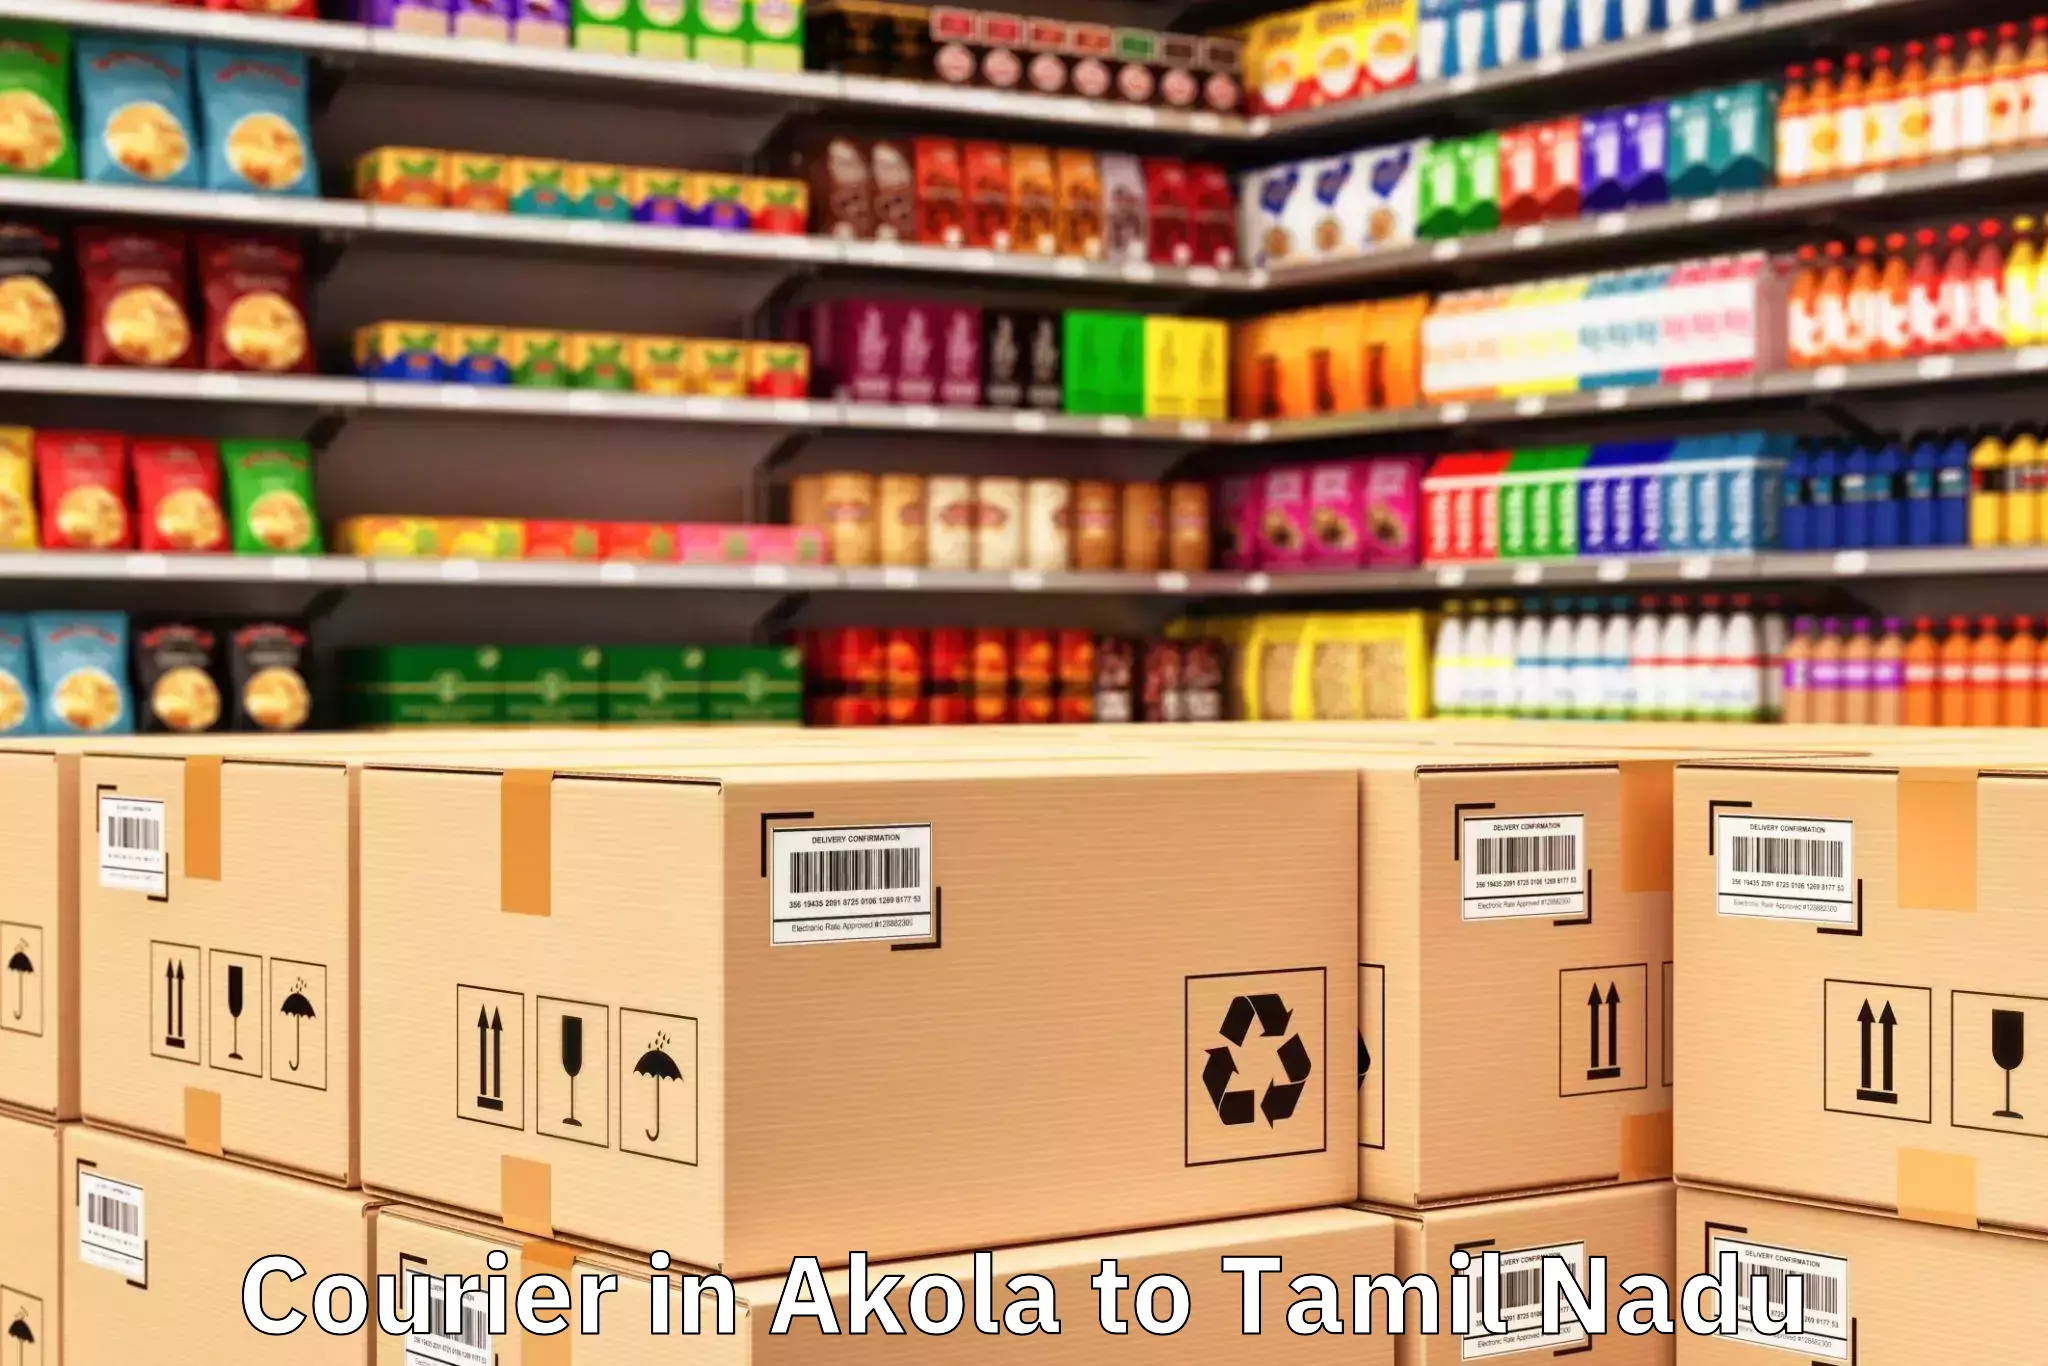 Trusted Akola to Anthiyur Courier